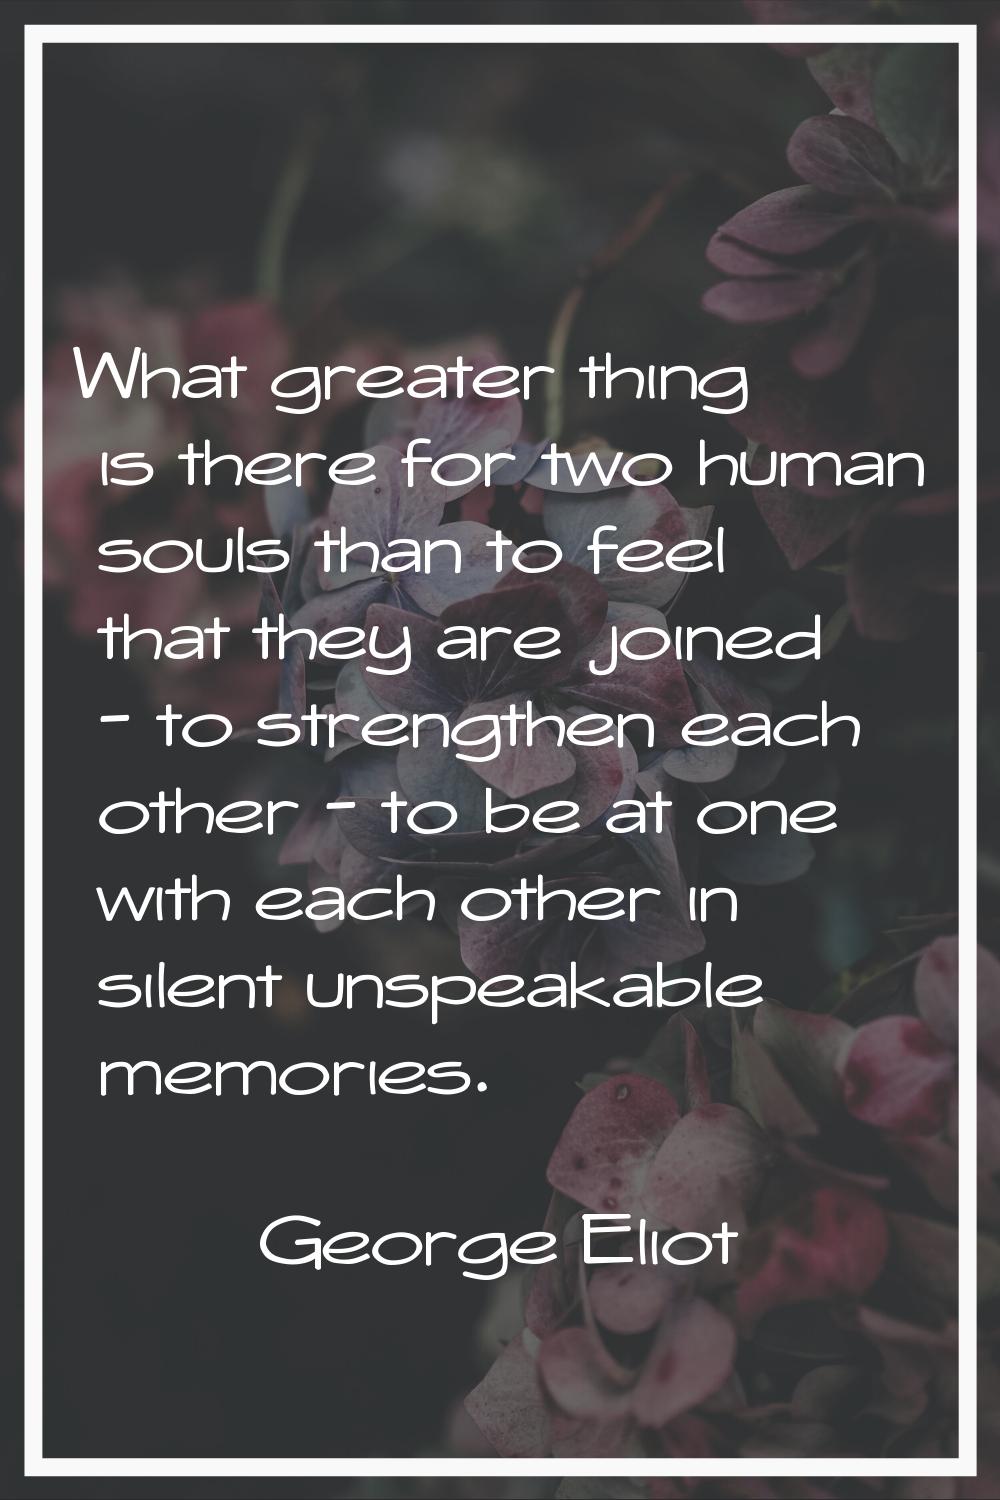 What greater thing is there for two human souls than to feel that they are joined - to strengthen e